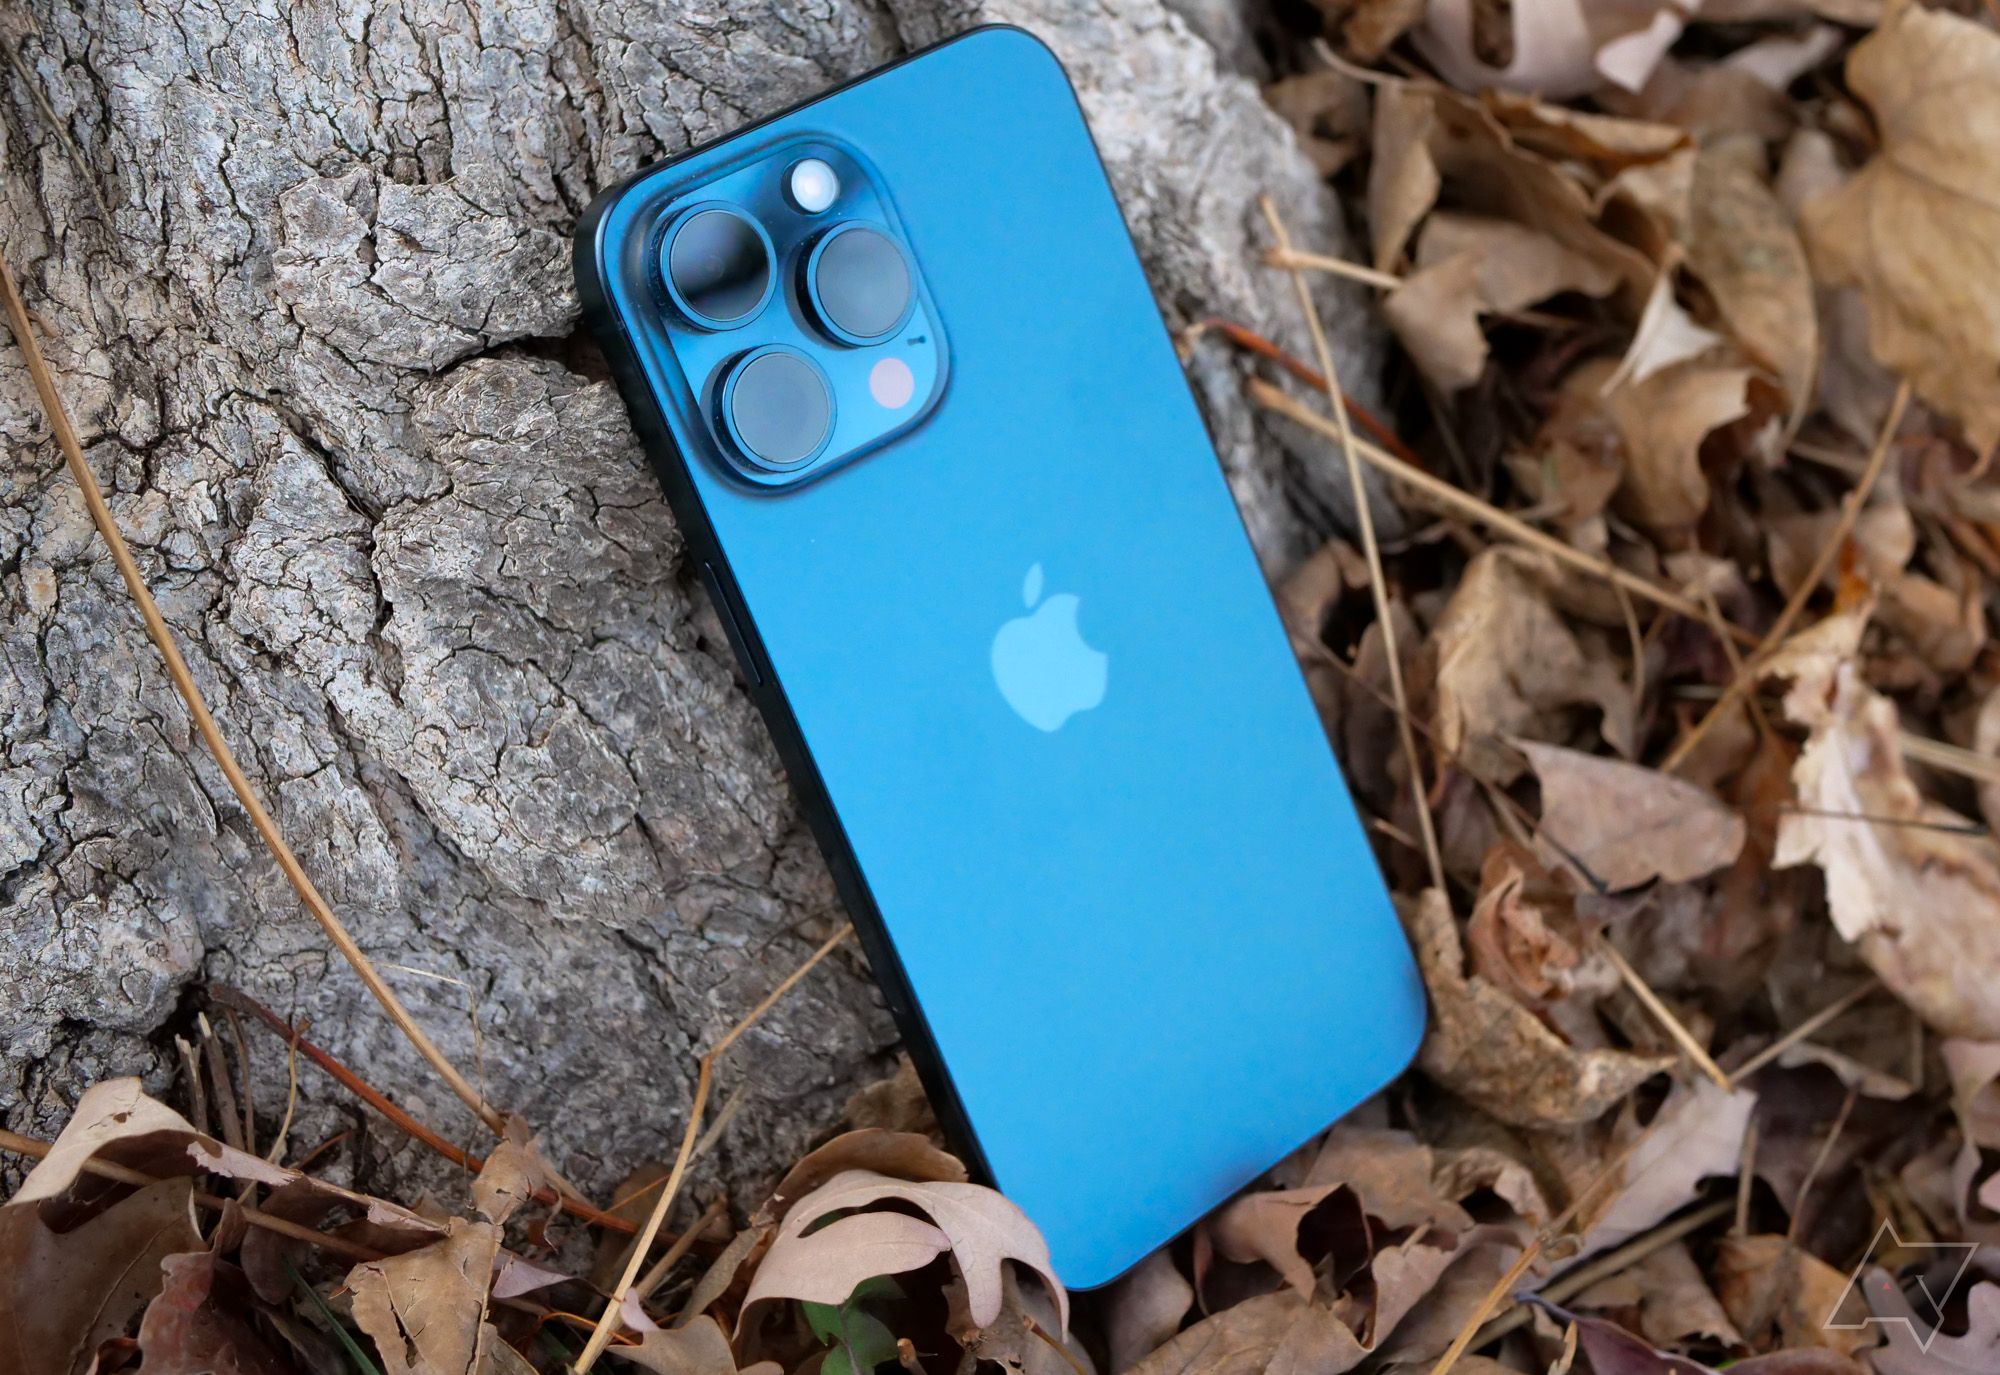 The iPhone 15 Pro Max leaning against a tree with leaves scattered